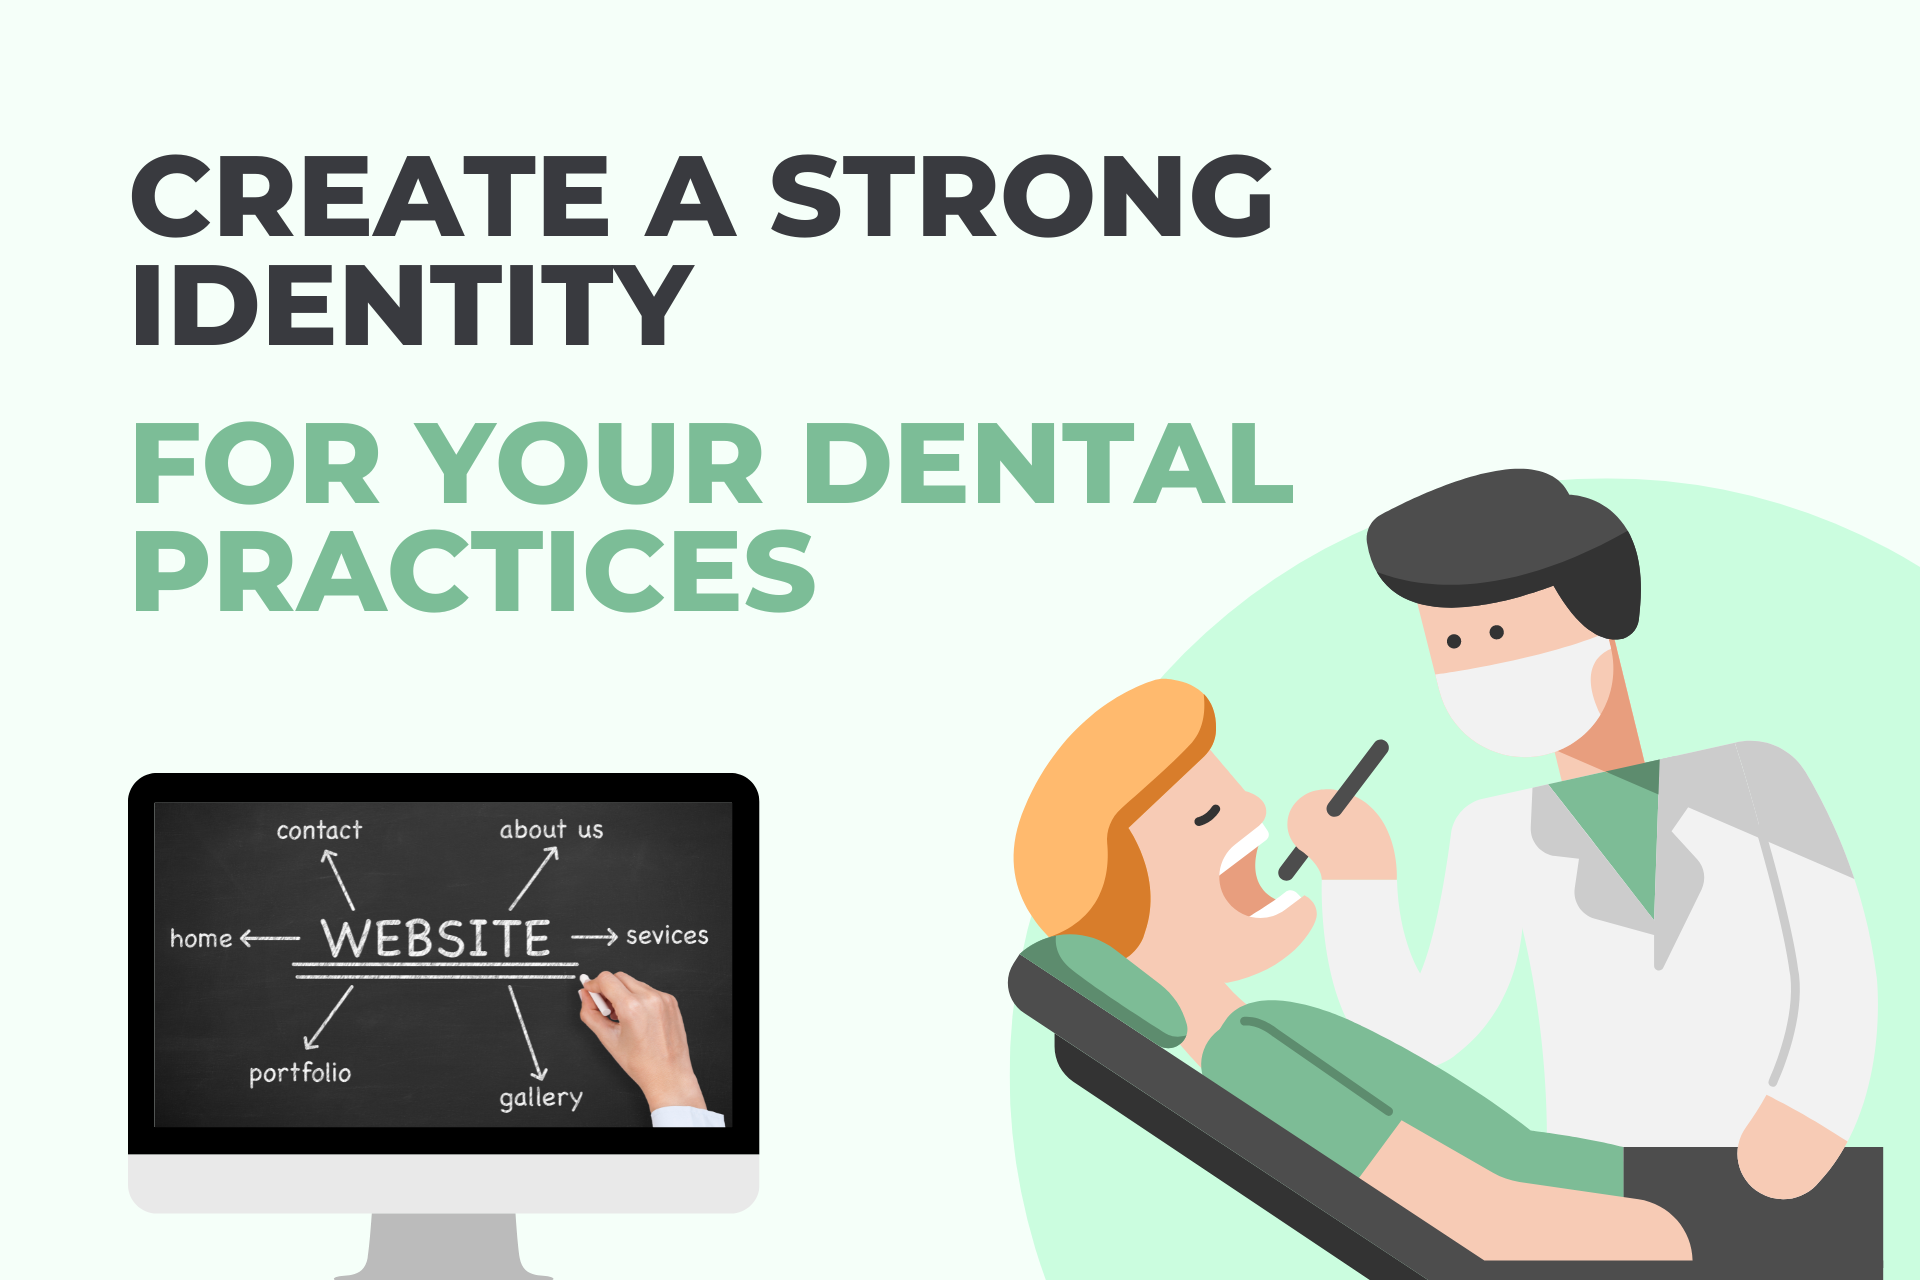 How to Create a Strong Identity for your Dental Practices?